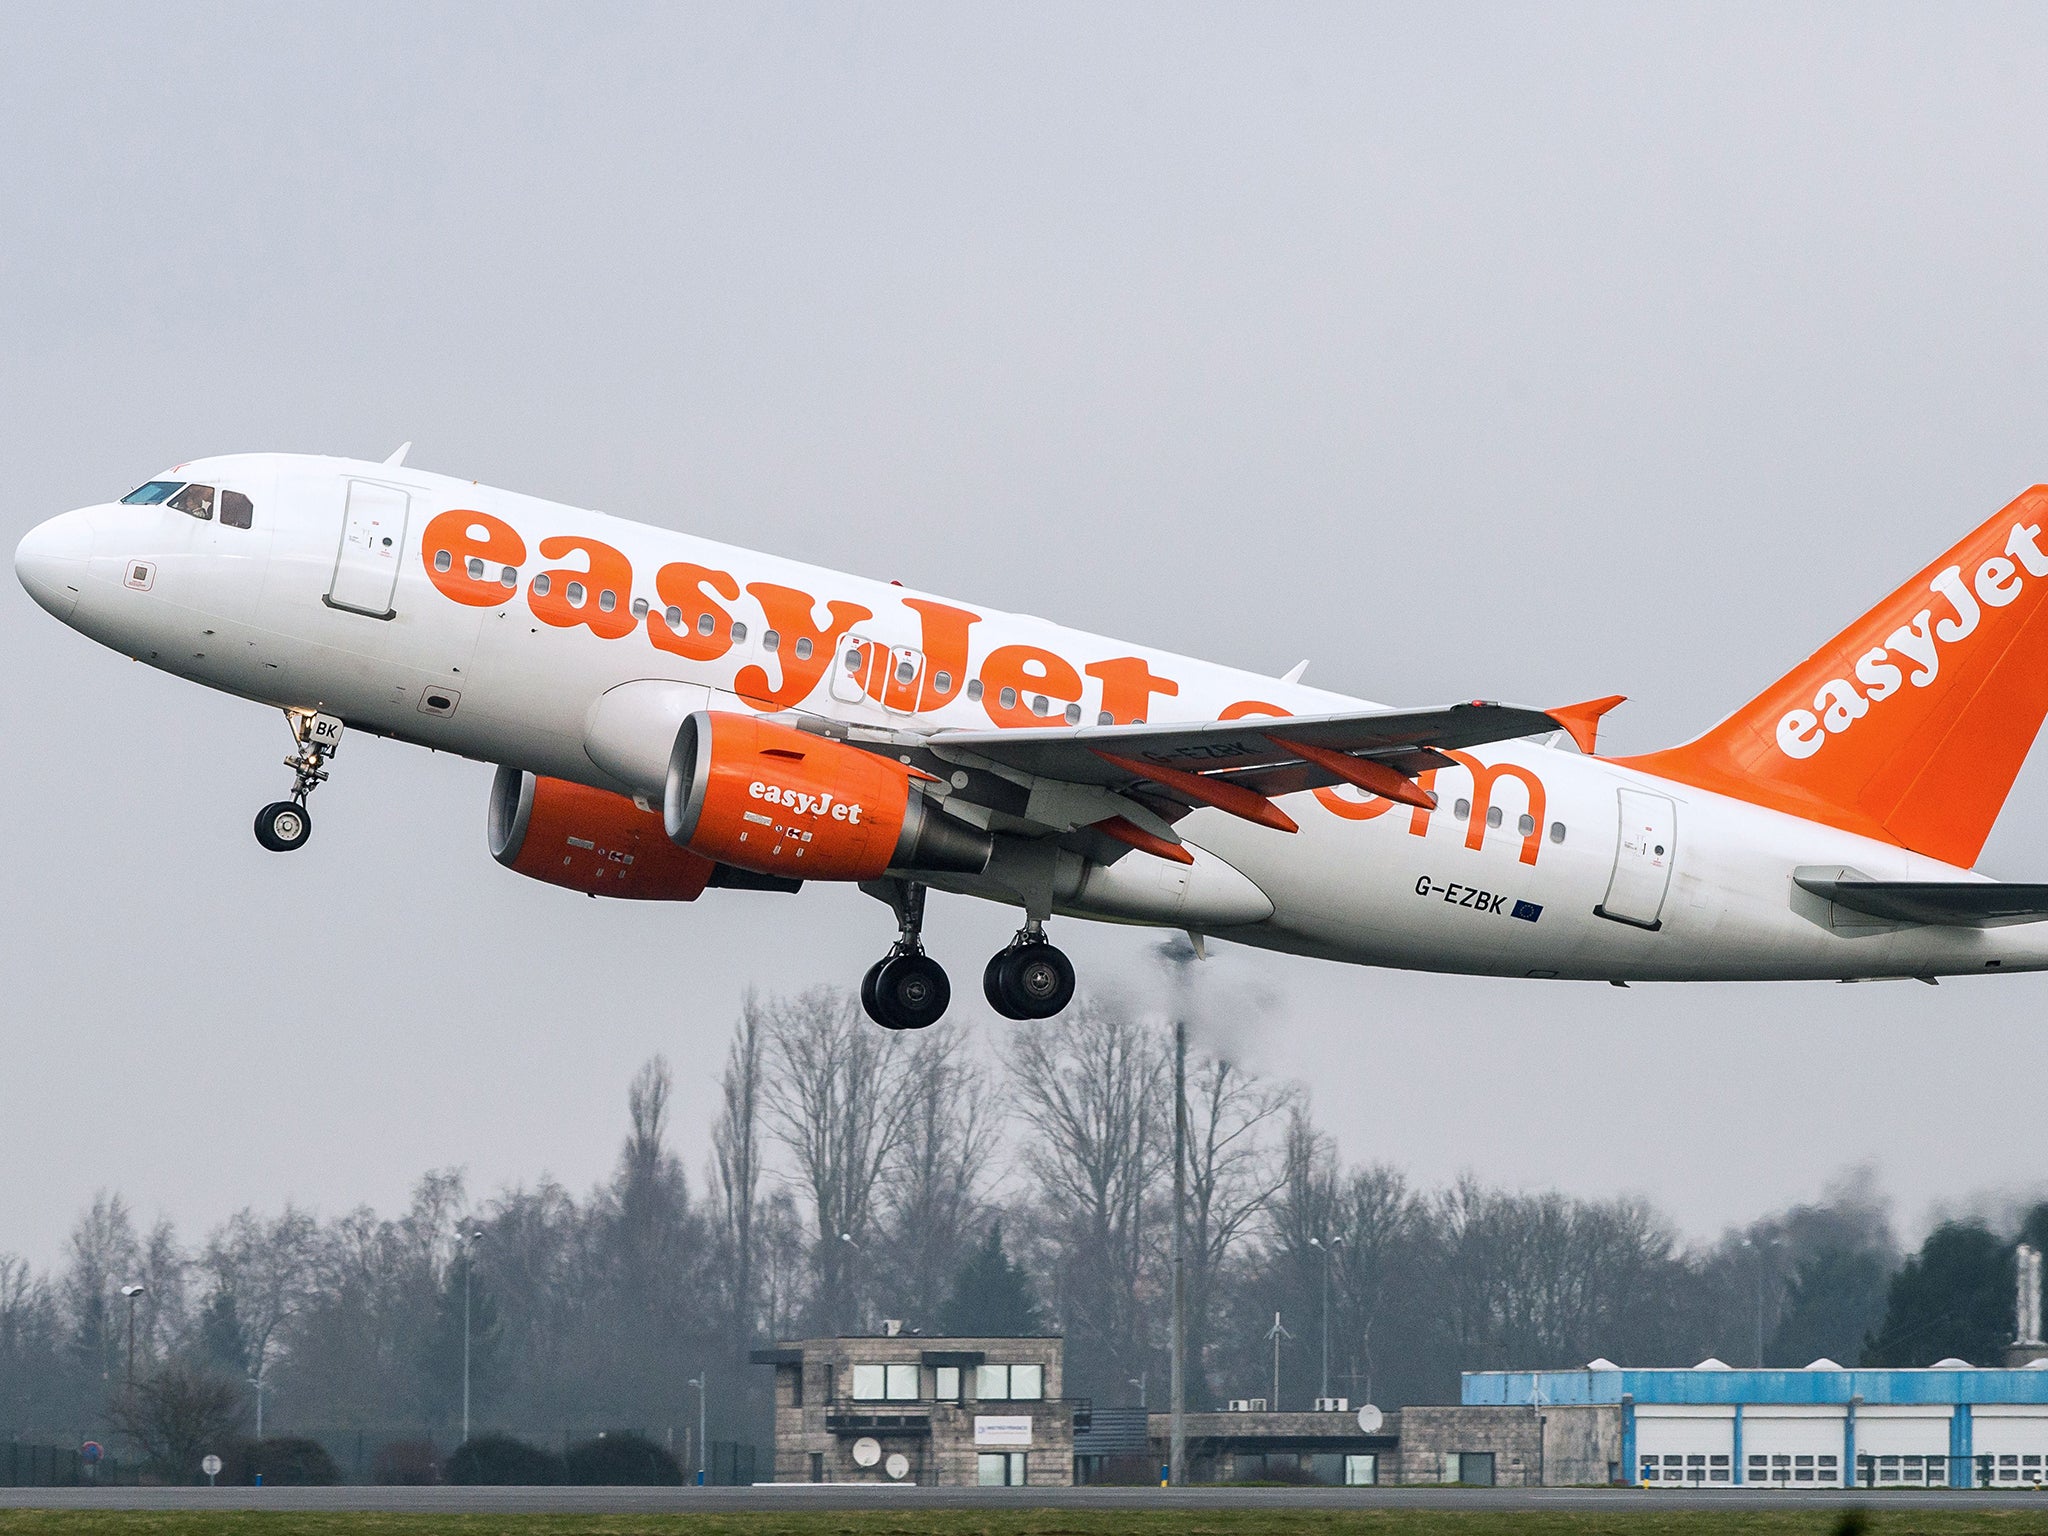 An EasyJet aircraft takes off